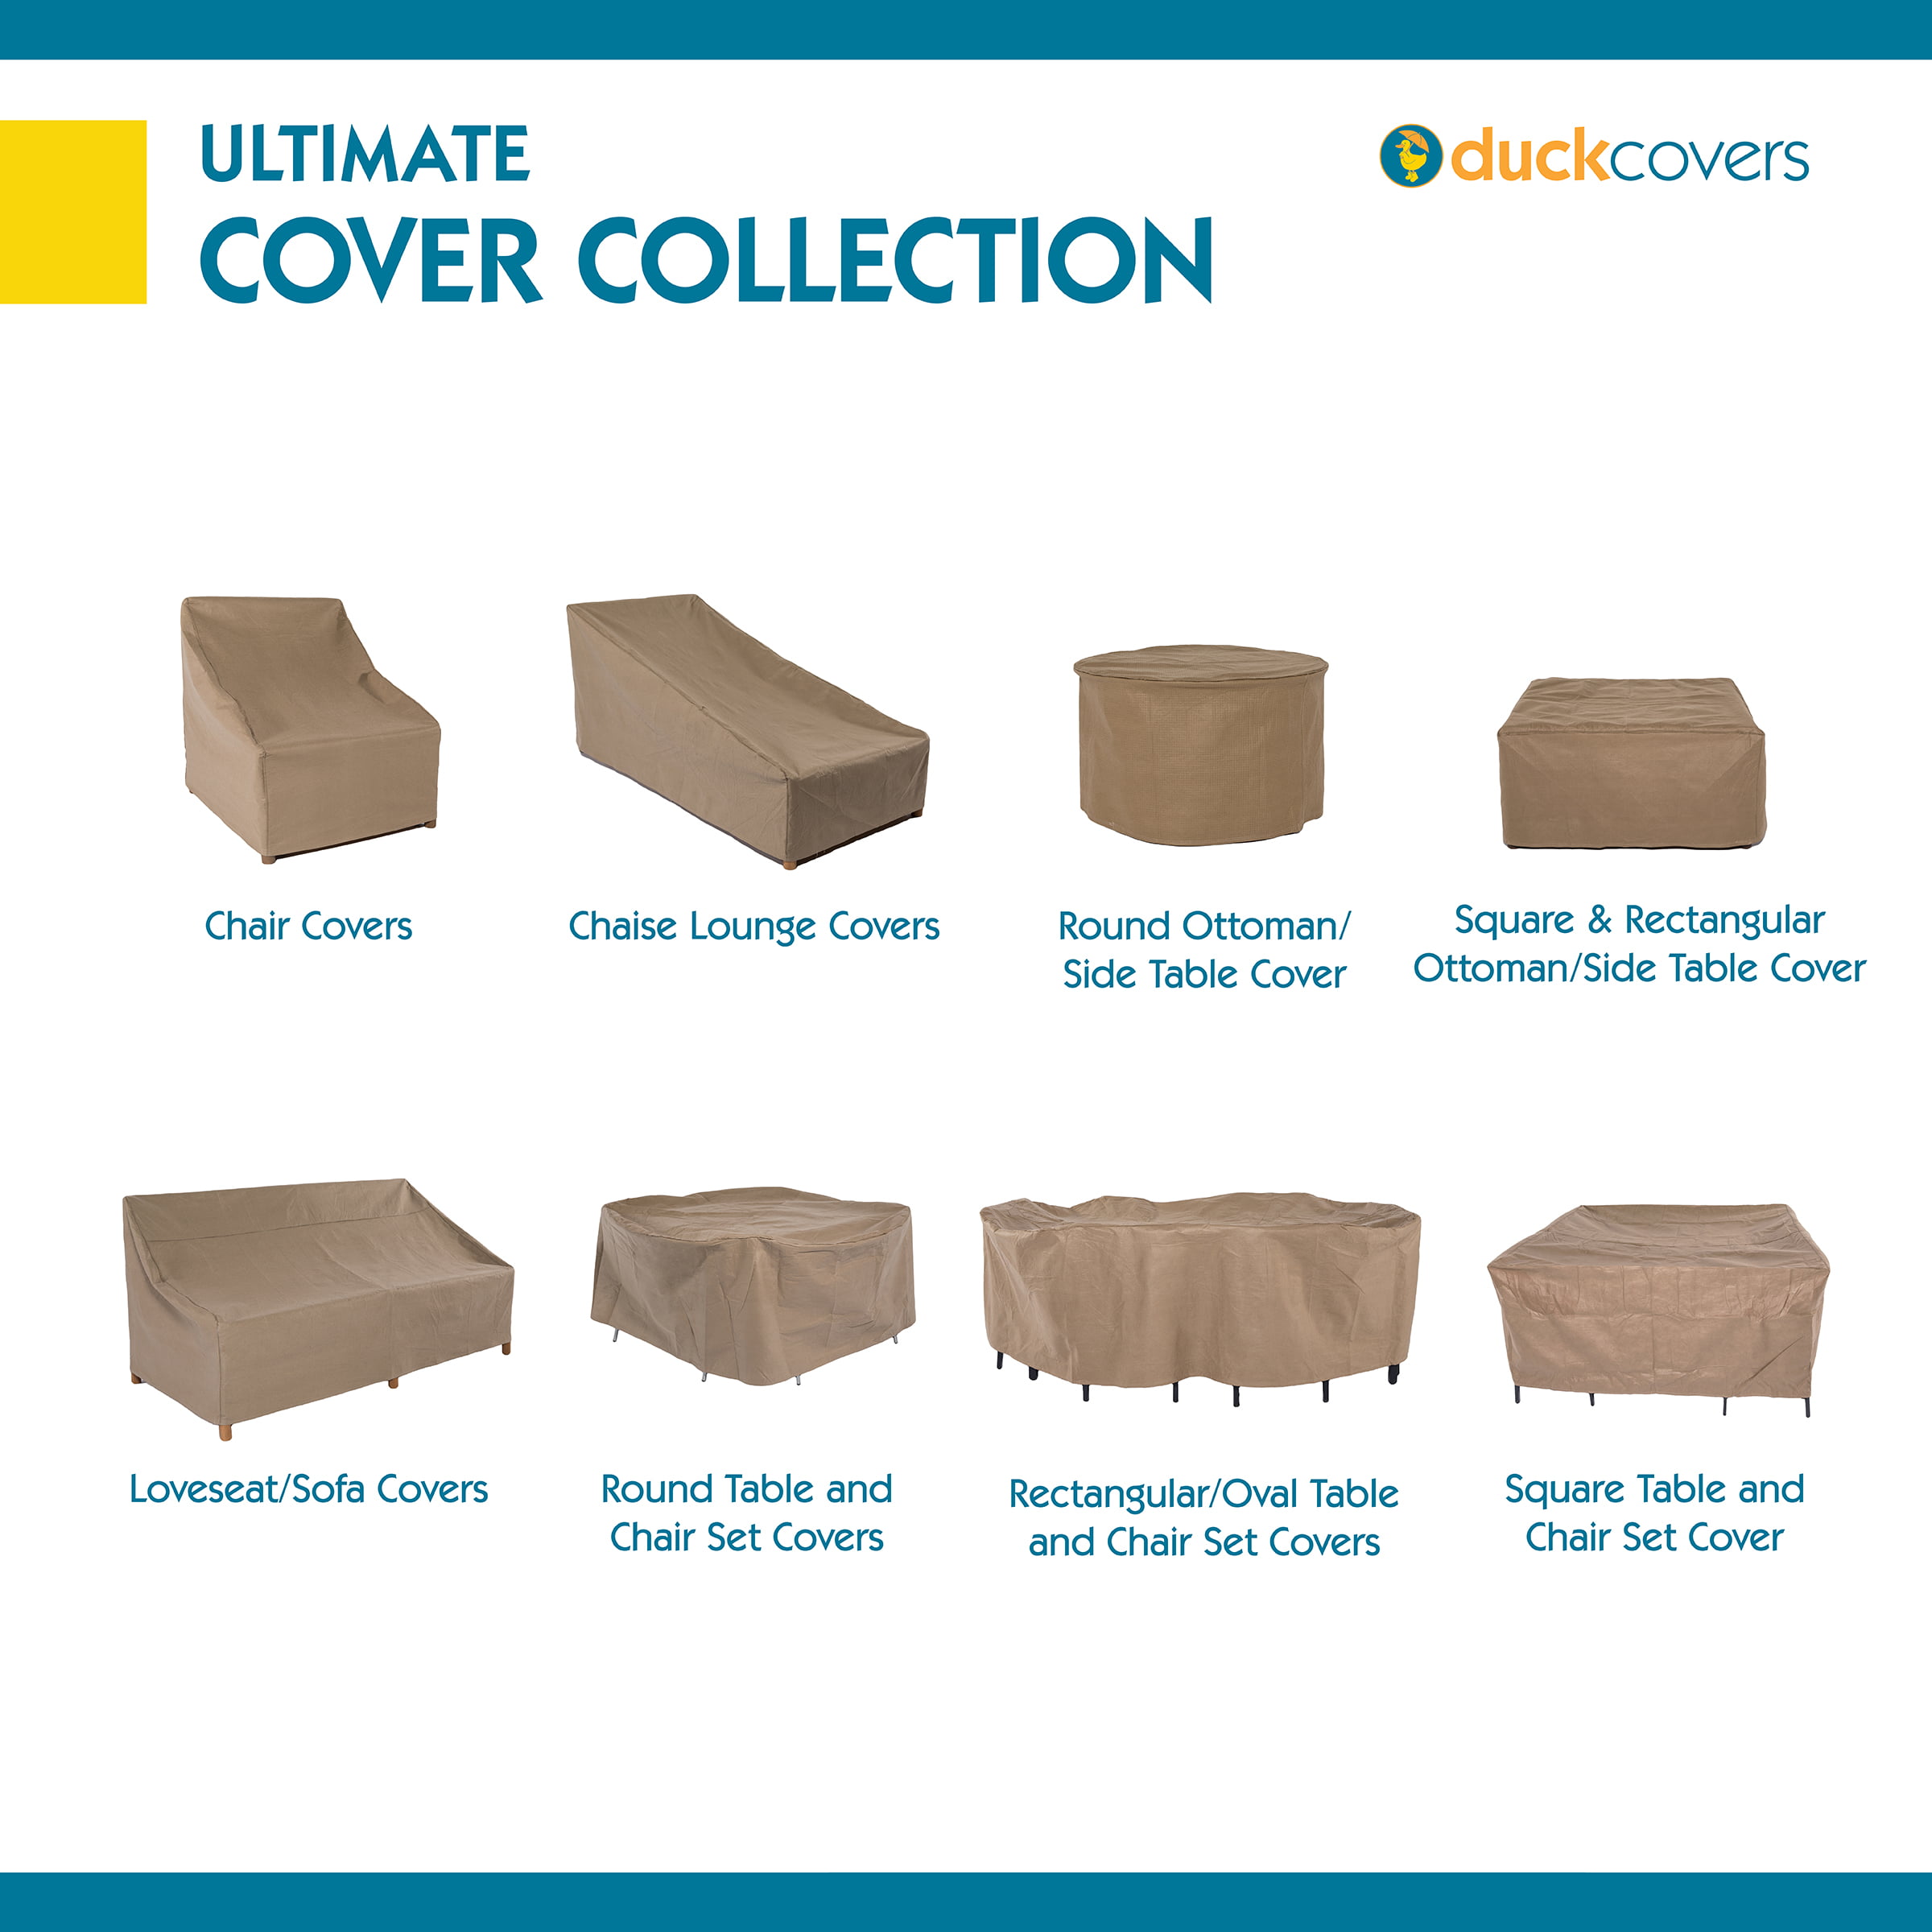 Pack of 2 Duck Covers Essential Water-Resistant 26 Inch Square Patio Ottoman/Side Table Cover 